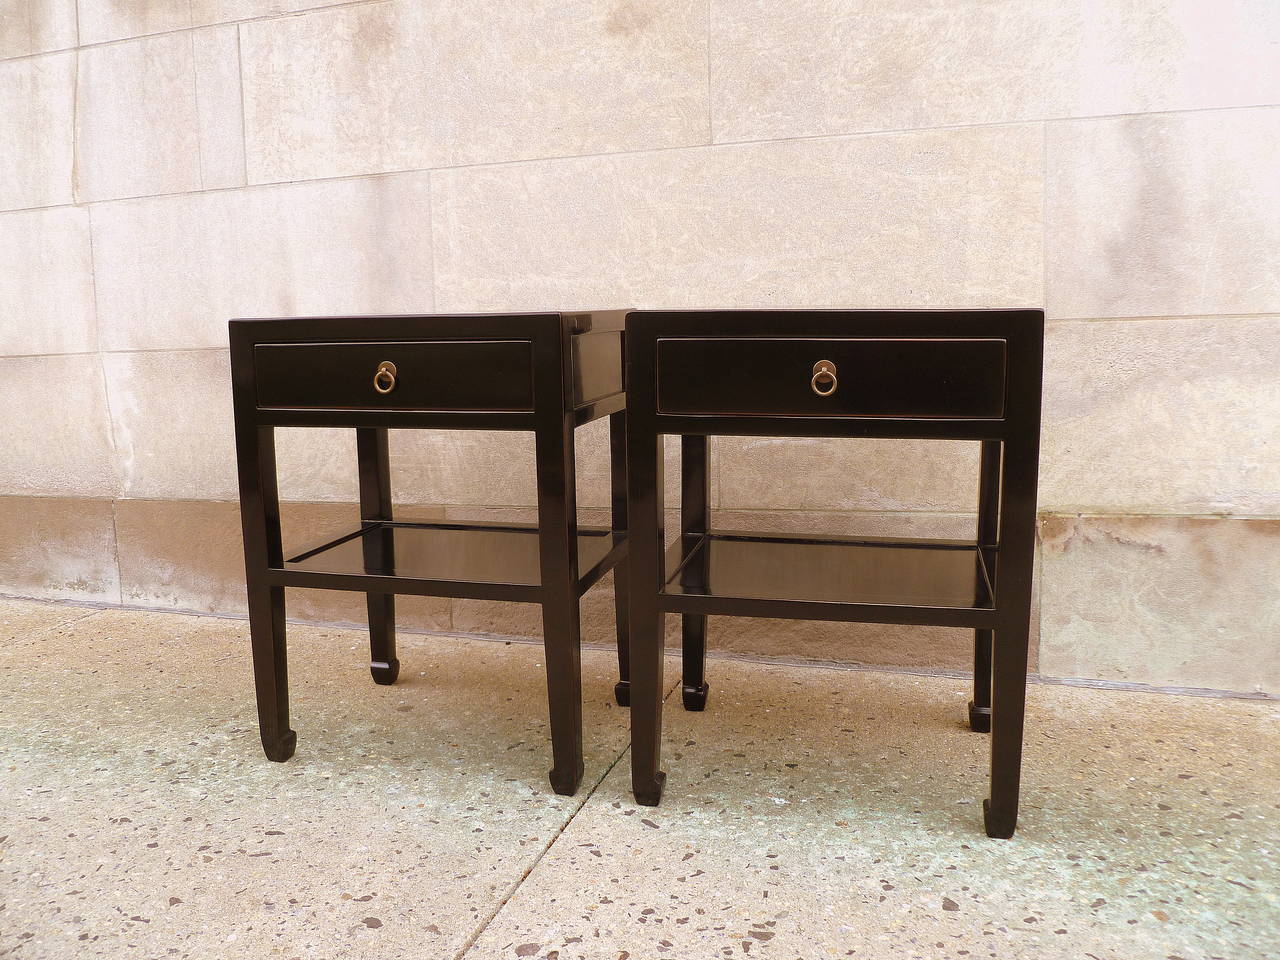 Ming A Pair of Black Lacquer End Tables with Shelf and Drawer